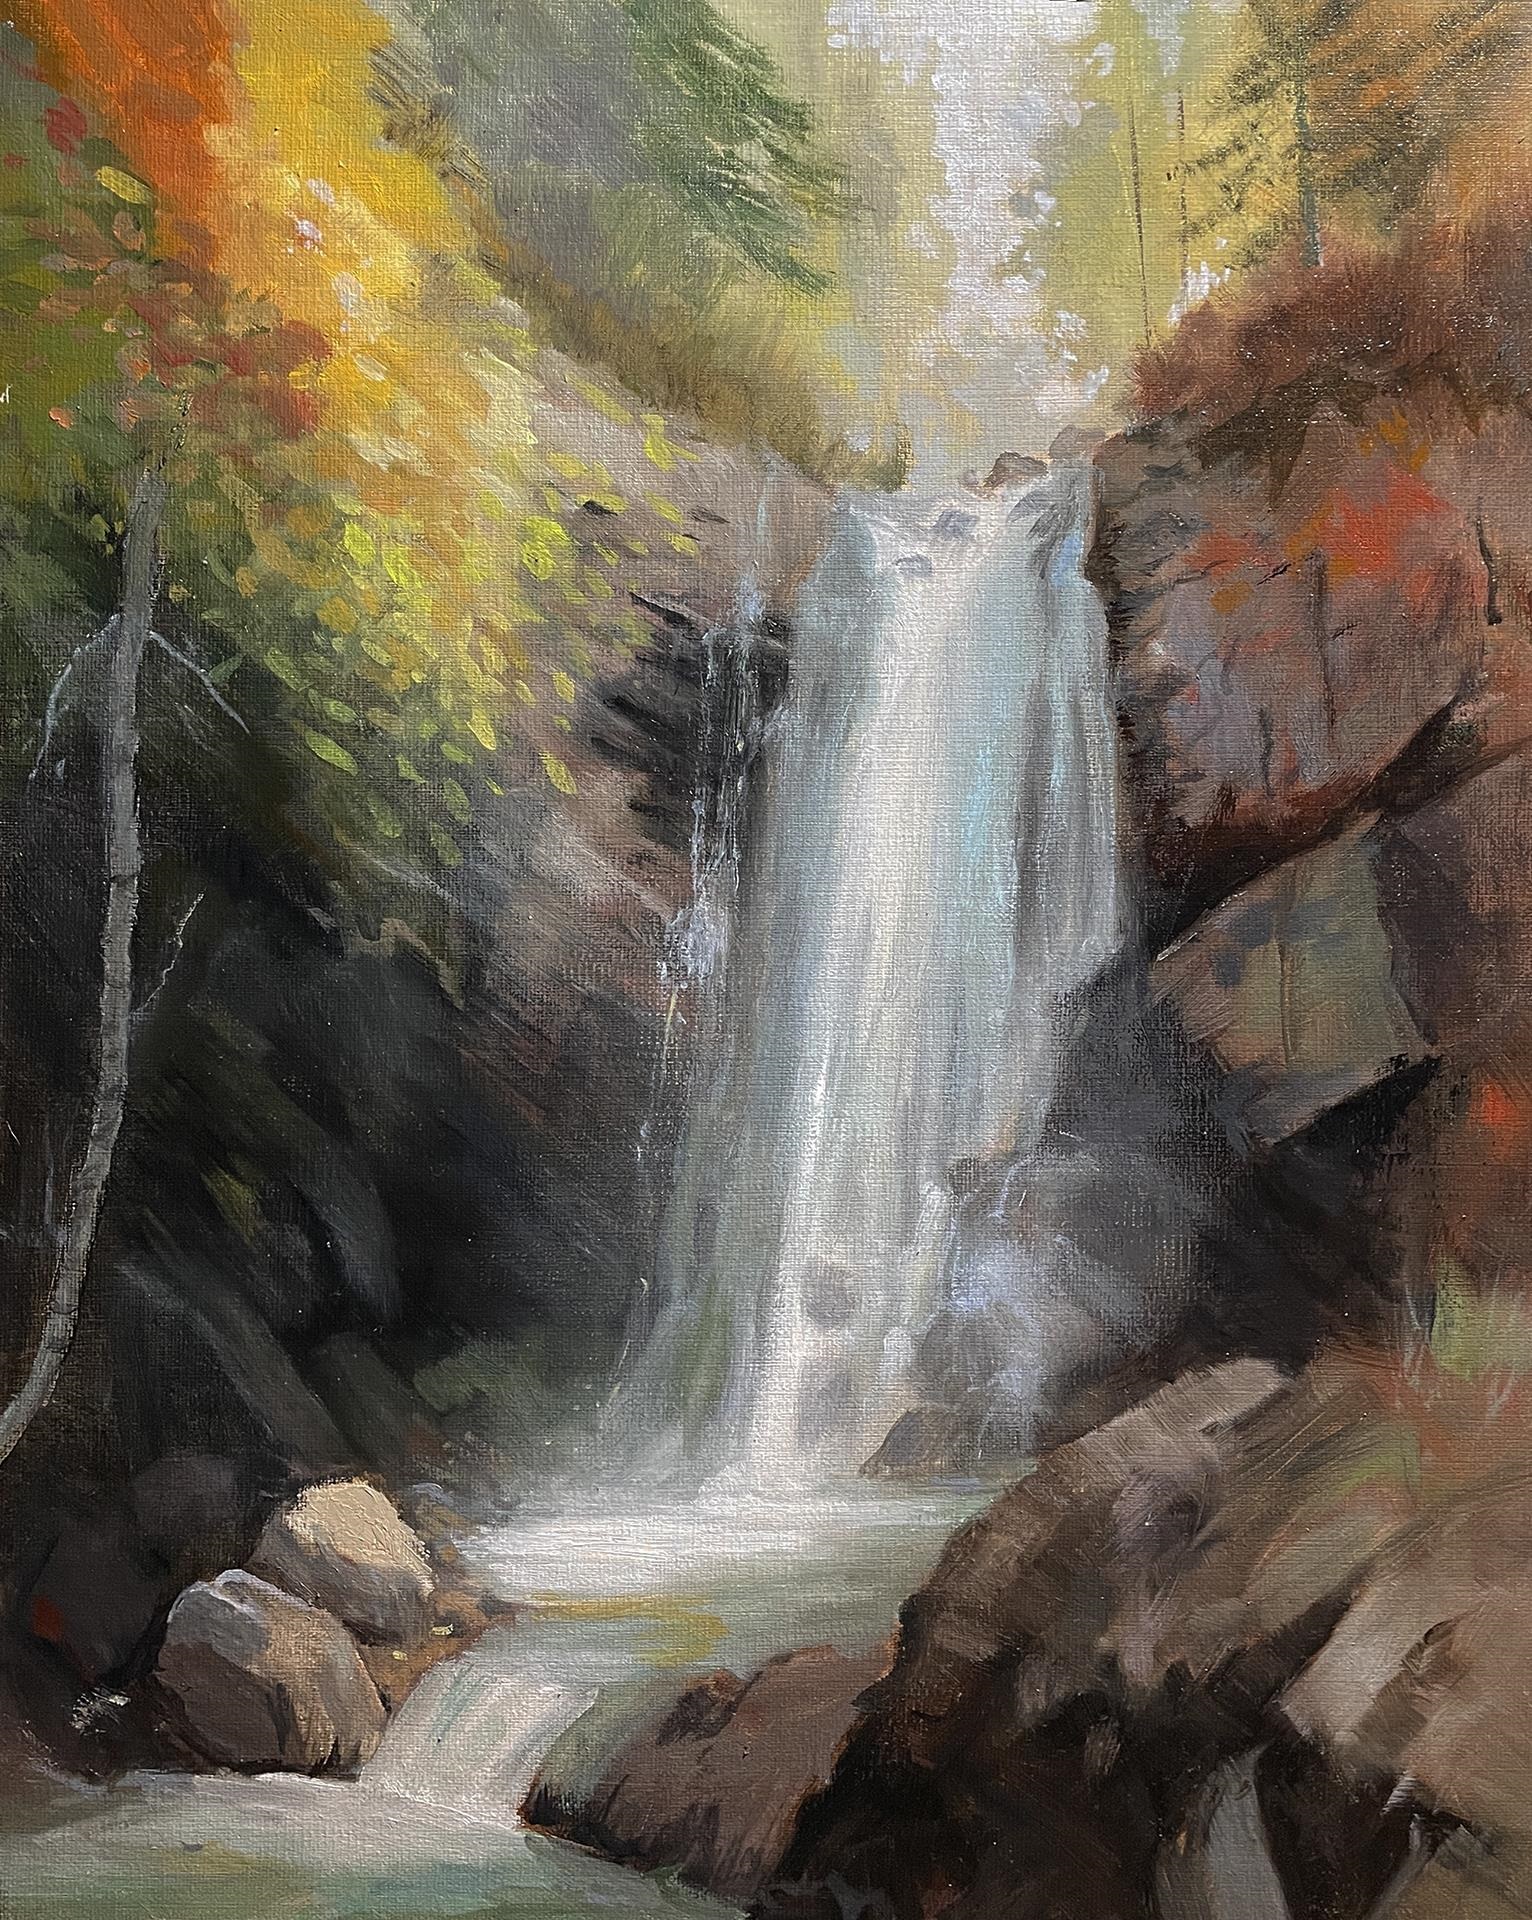 Karen Winters, “Switzer Falls Remembered,” Oil on linen panel, 14 x 11 inches, Collection of the Artist